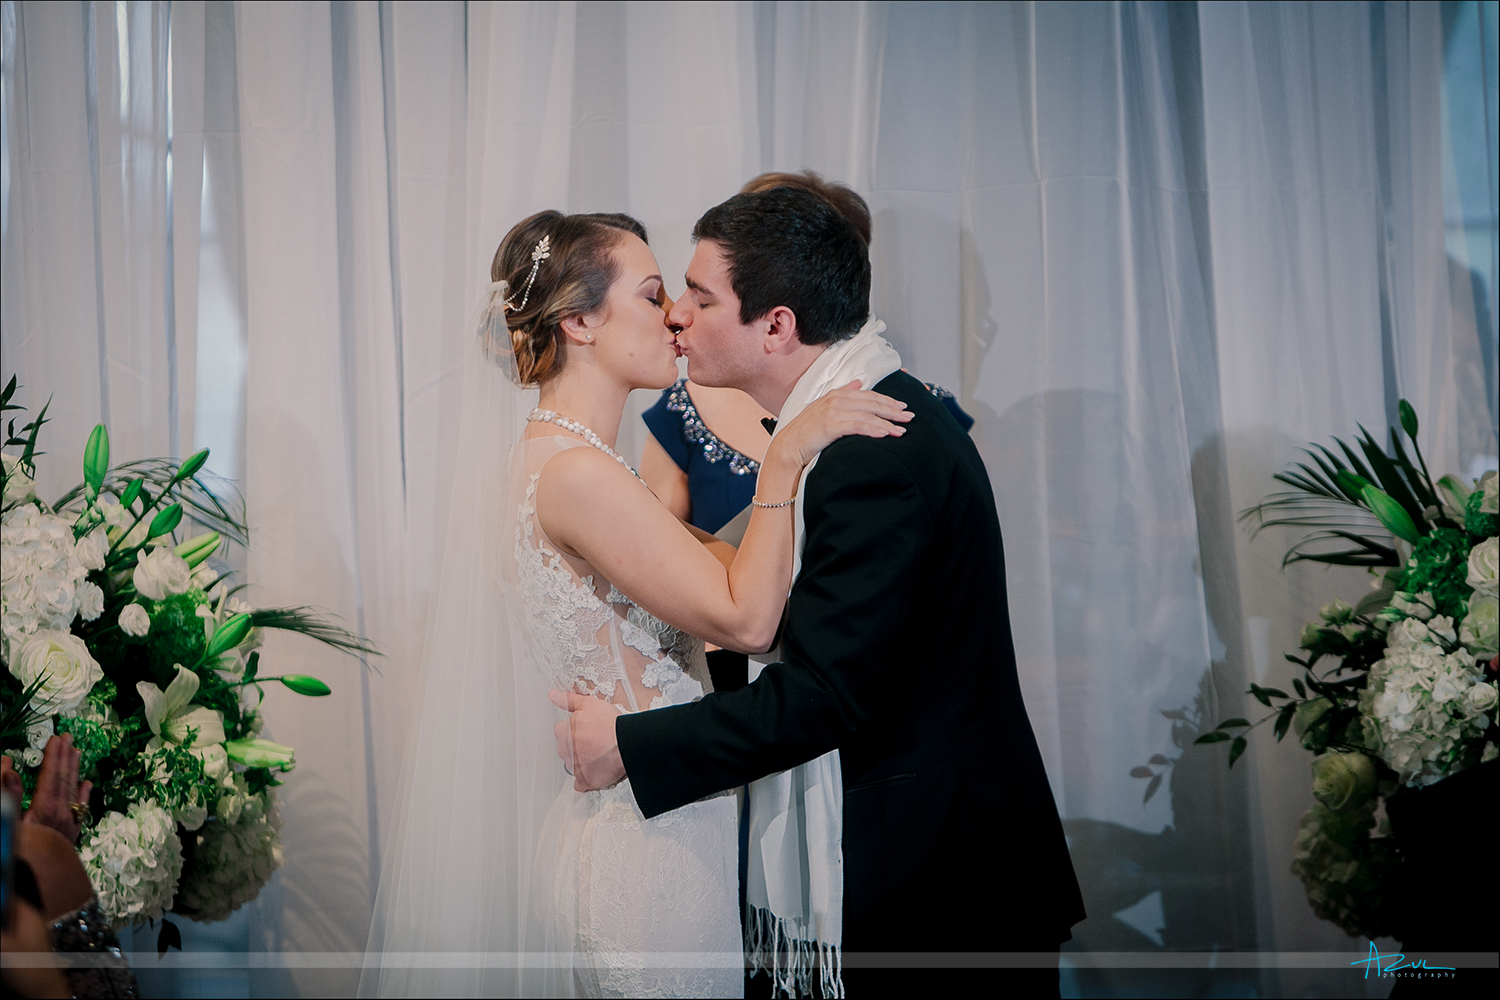 Wedding ceremony kiss of the bride and groom at 21c Museum & Hotel